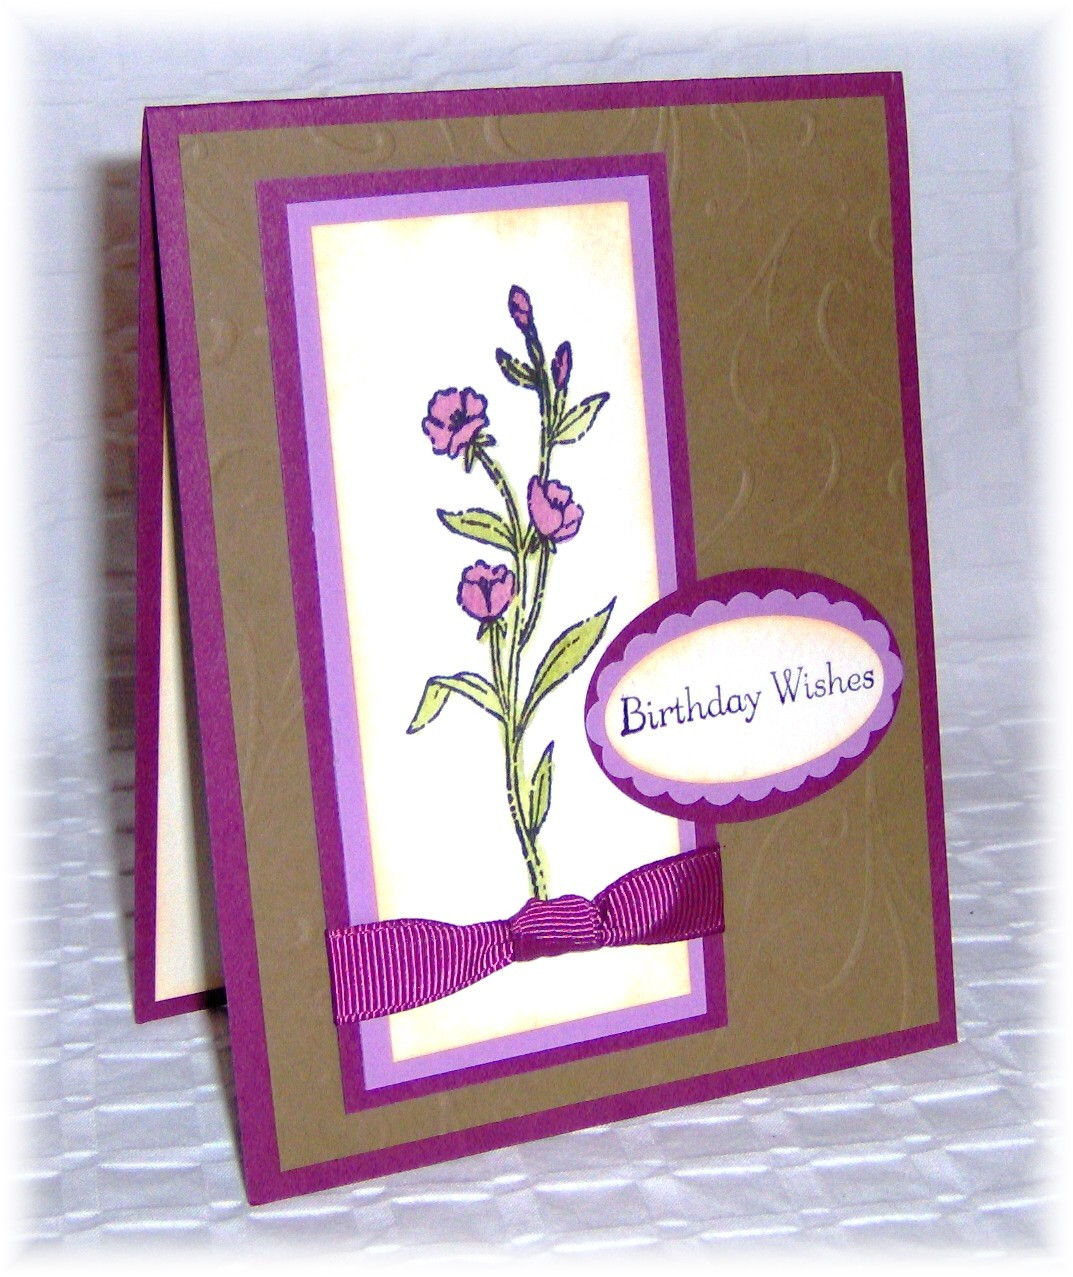 Stampin Up Birthday Cards
 Stampin Up card ideas